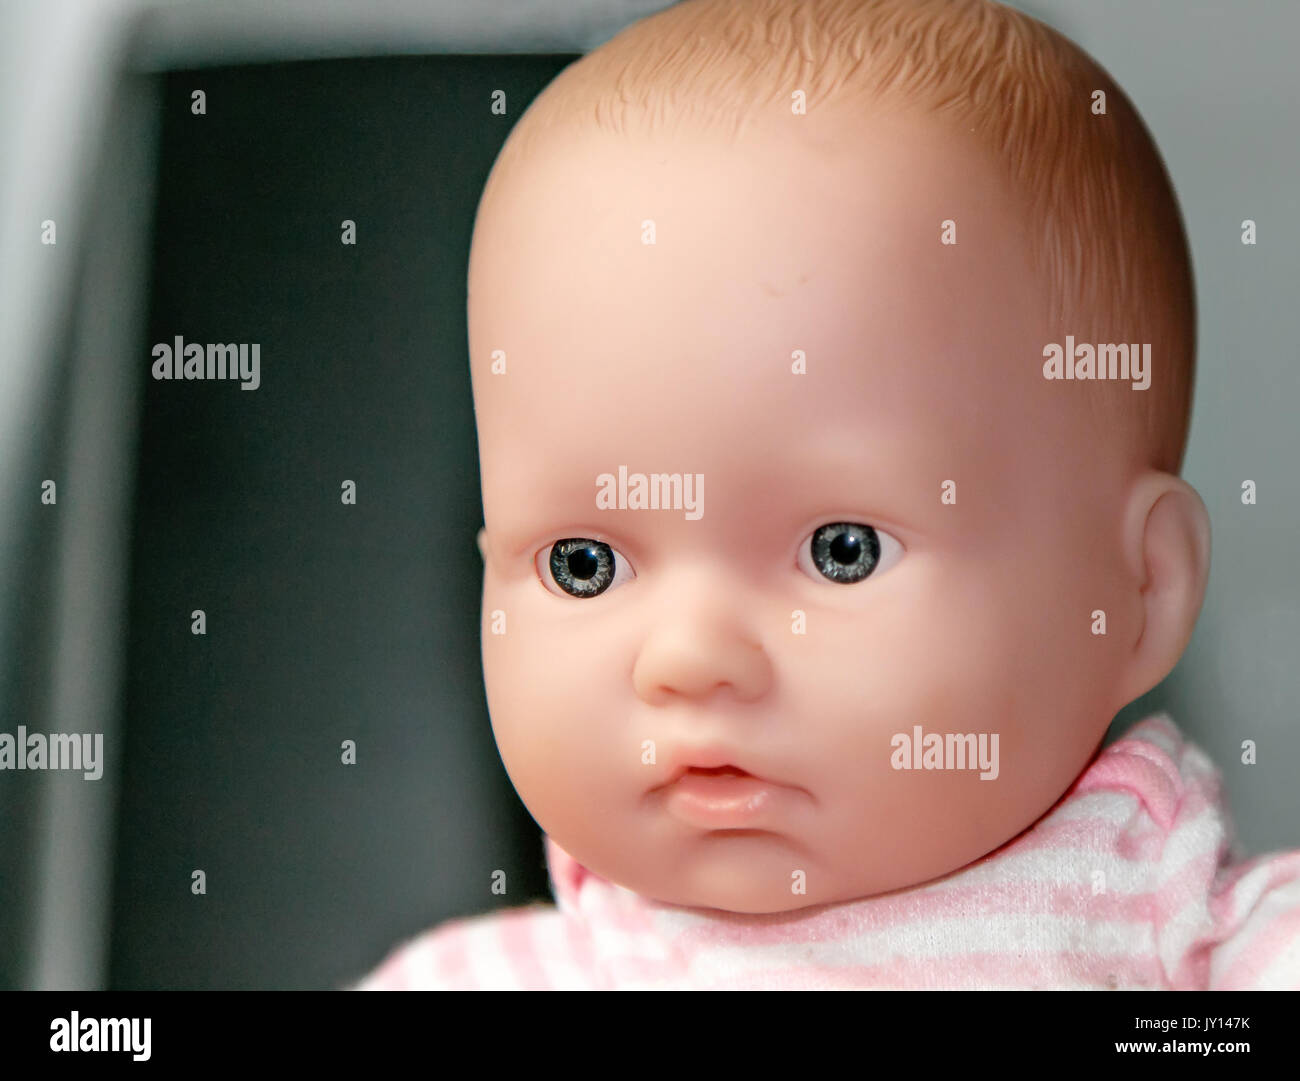 Closeup of a rubber baby doll. Stock Photo